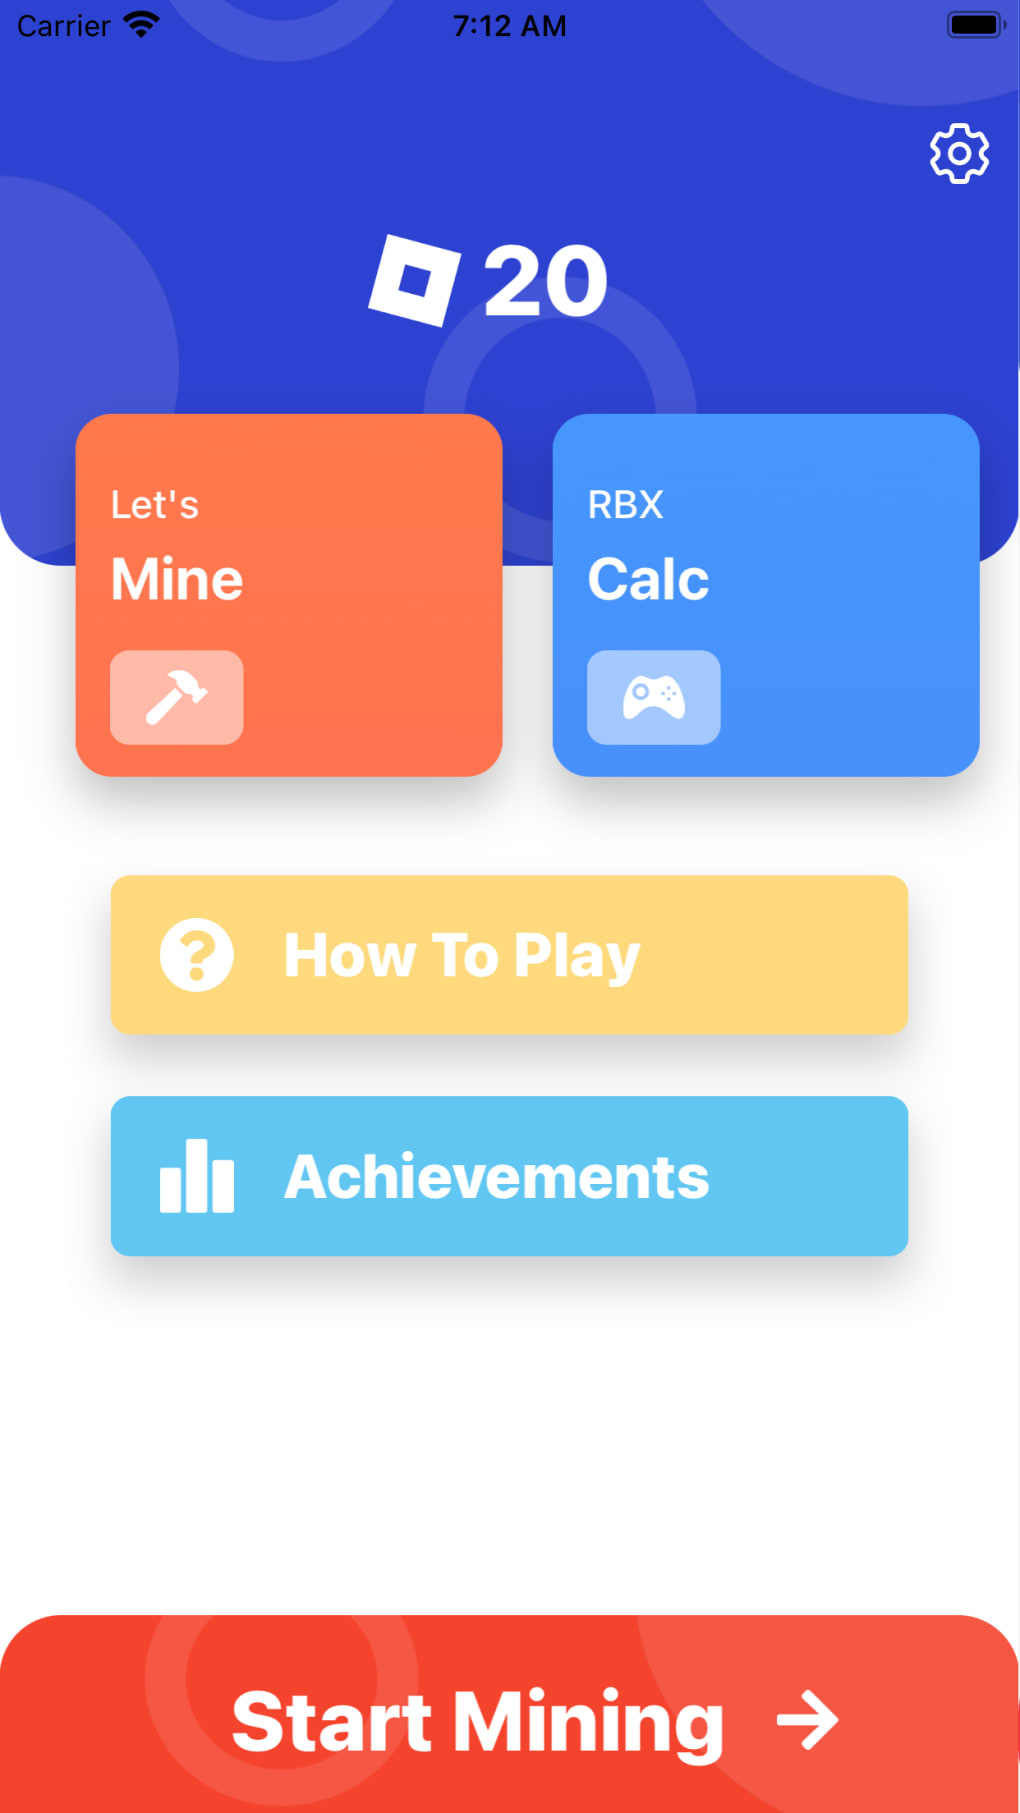 Quiz for Roblox Robux on the App Store